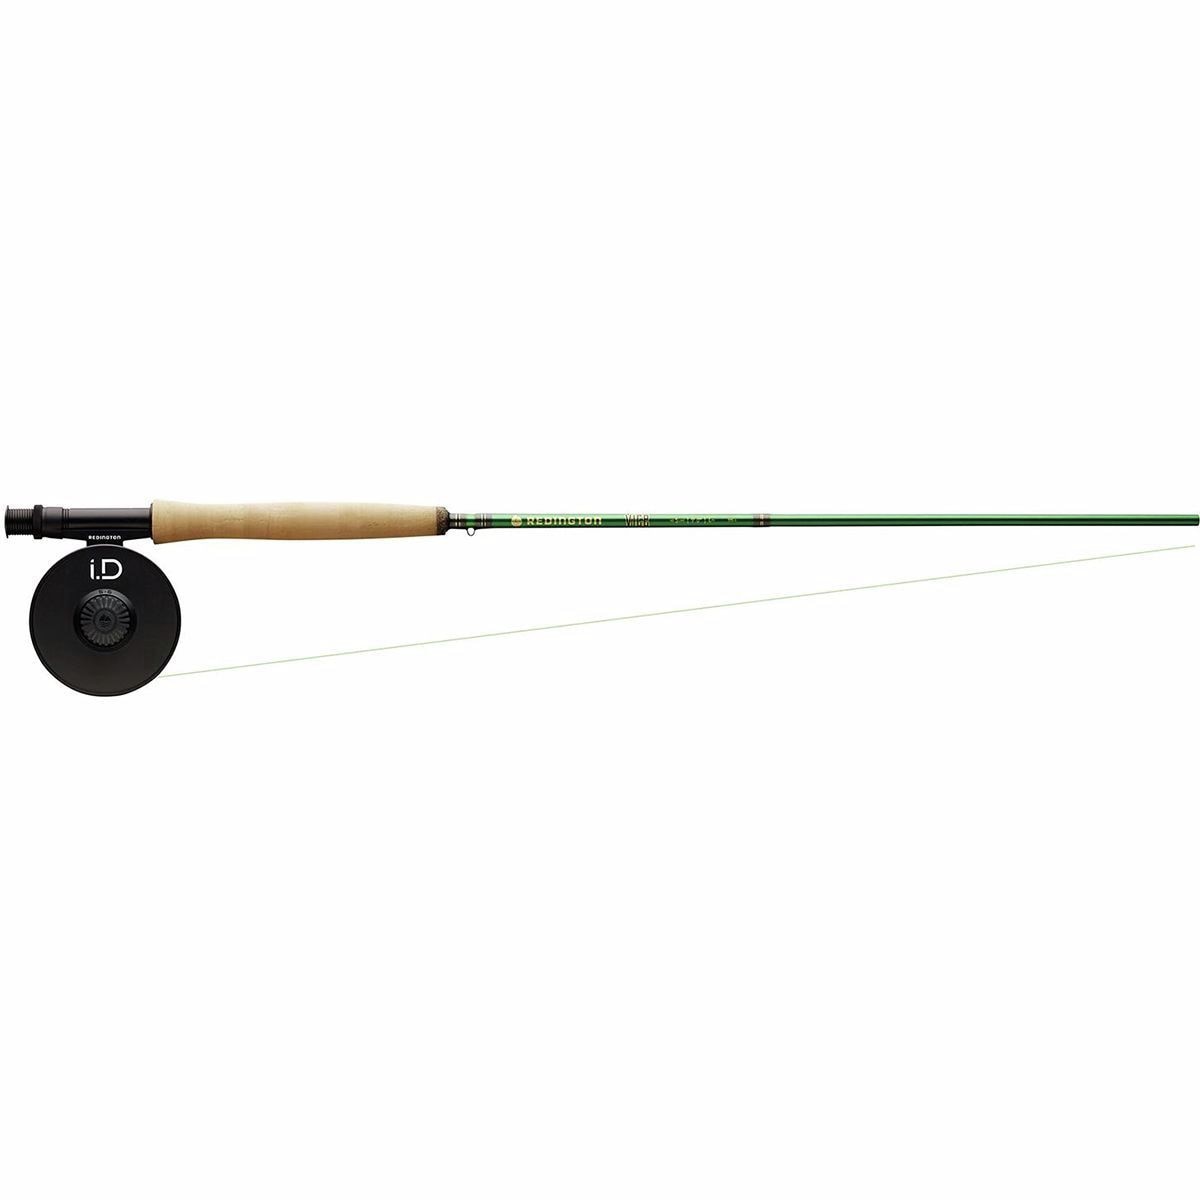 Redington Vice I.D Reel Outfit - Fly Fishing | Backcountry